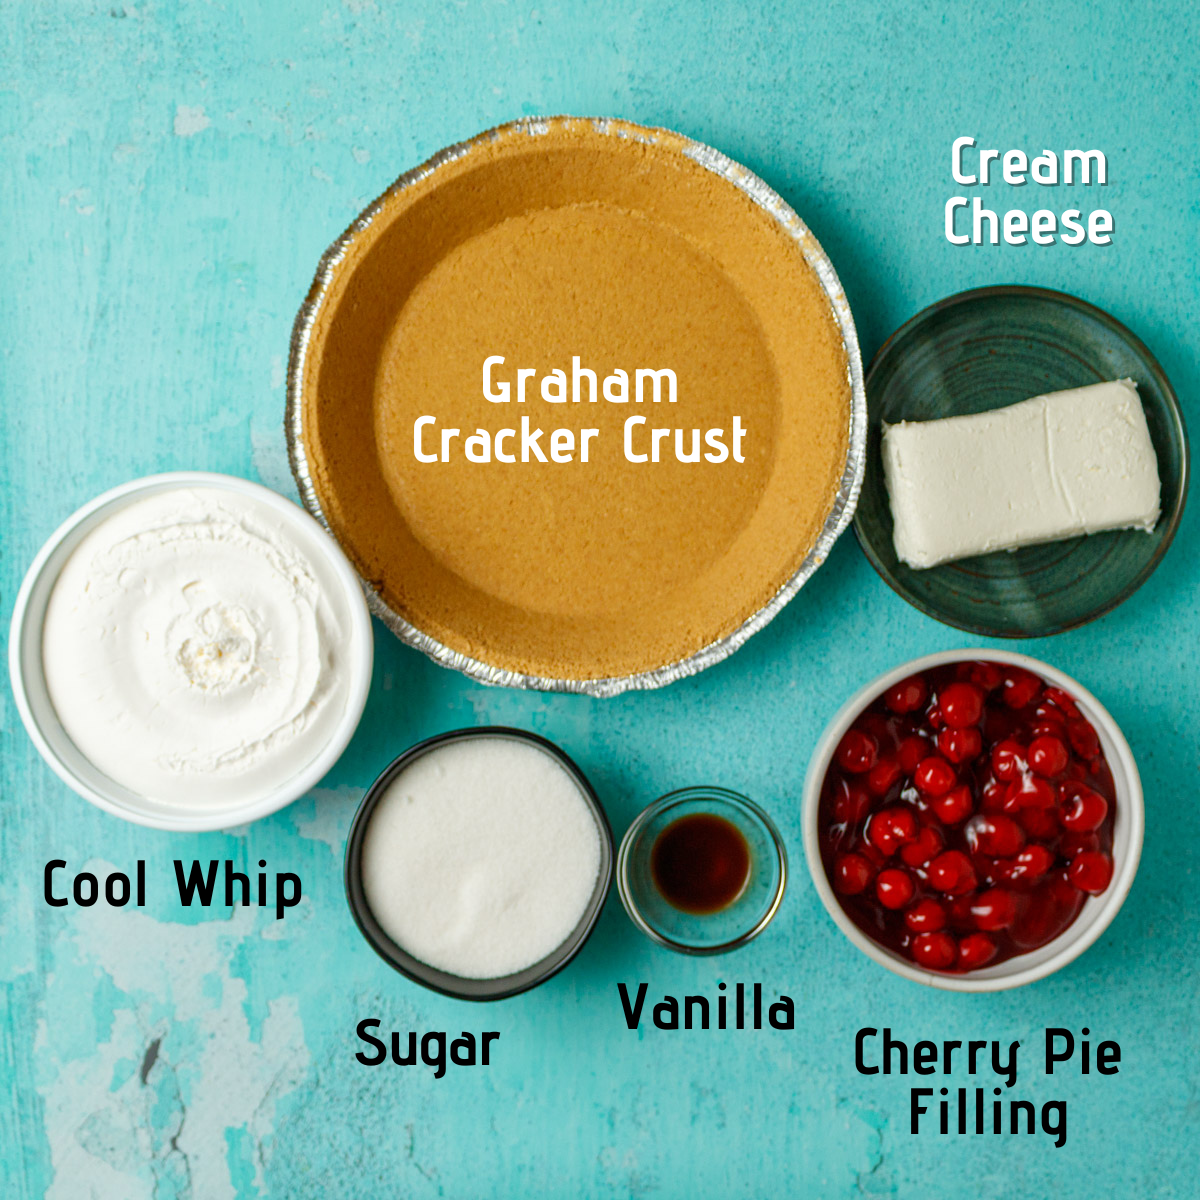 Raw ingredients laid out and labeled on a blue background. Graham cracker crust, cream cheese, cherry pie filling, vanilla, sugar and cool whip.